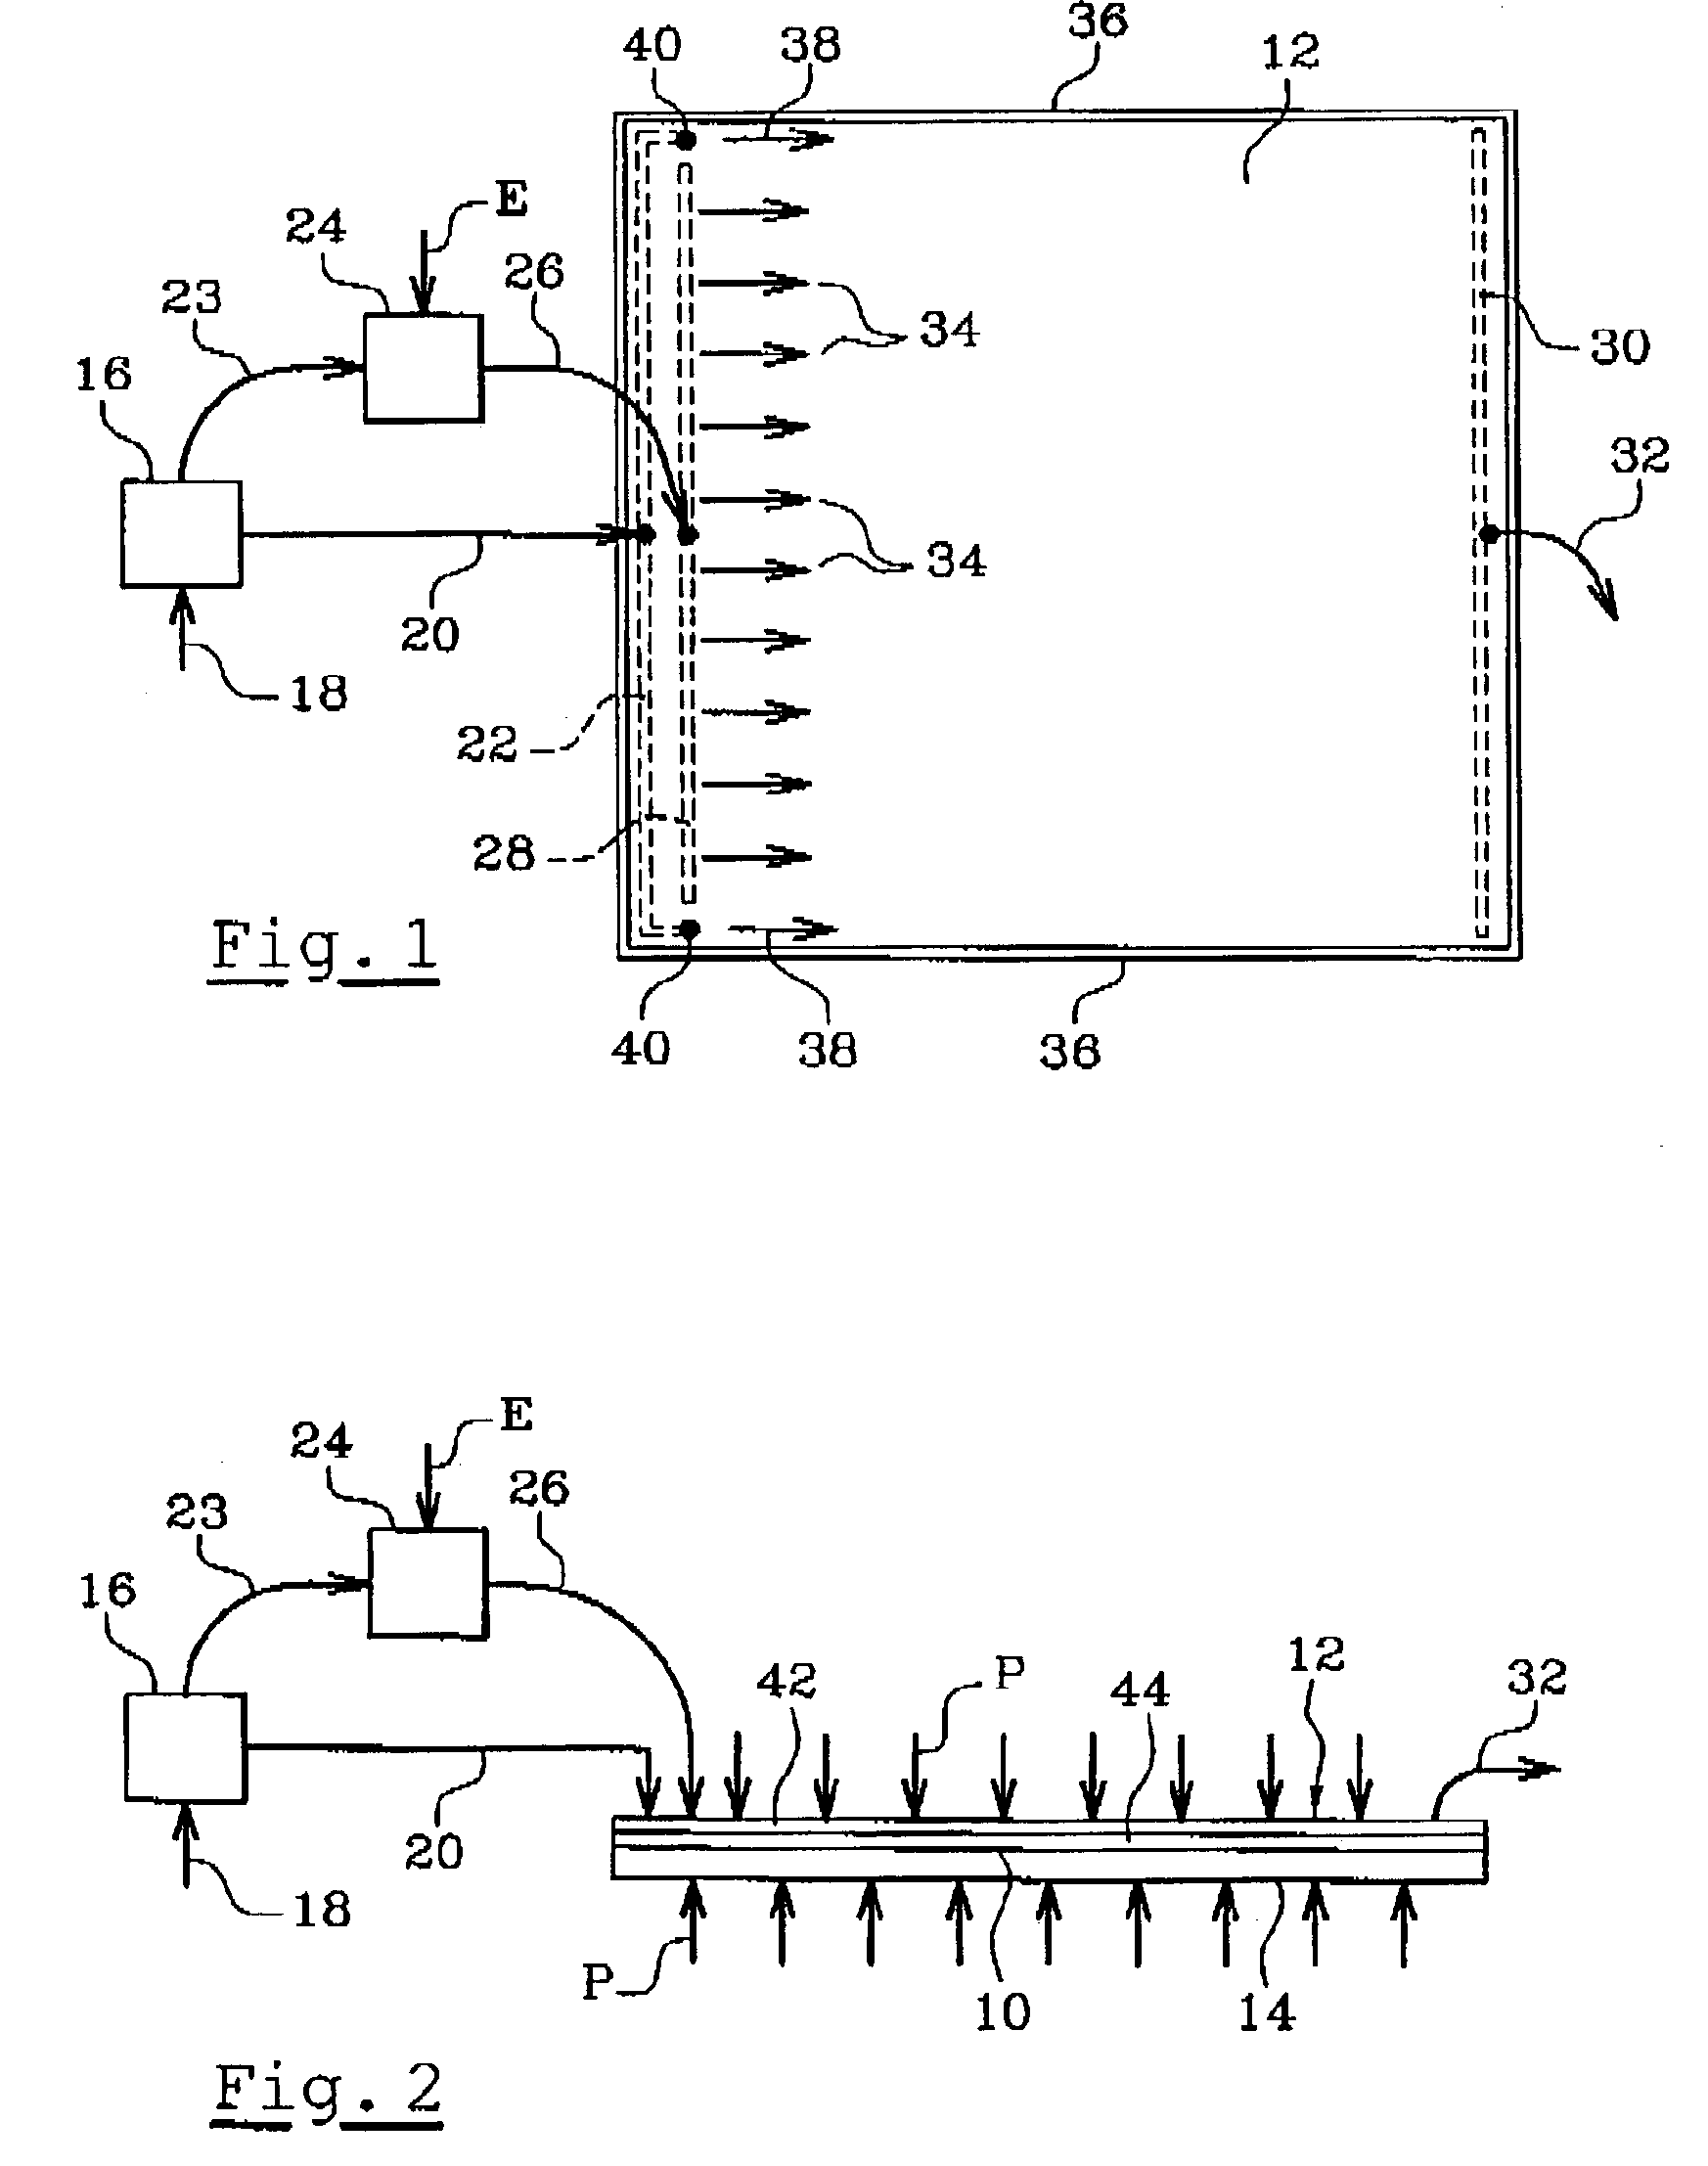 Apparatus for separating sample components by liquid chromatography under pressure